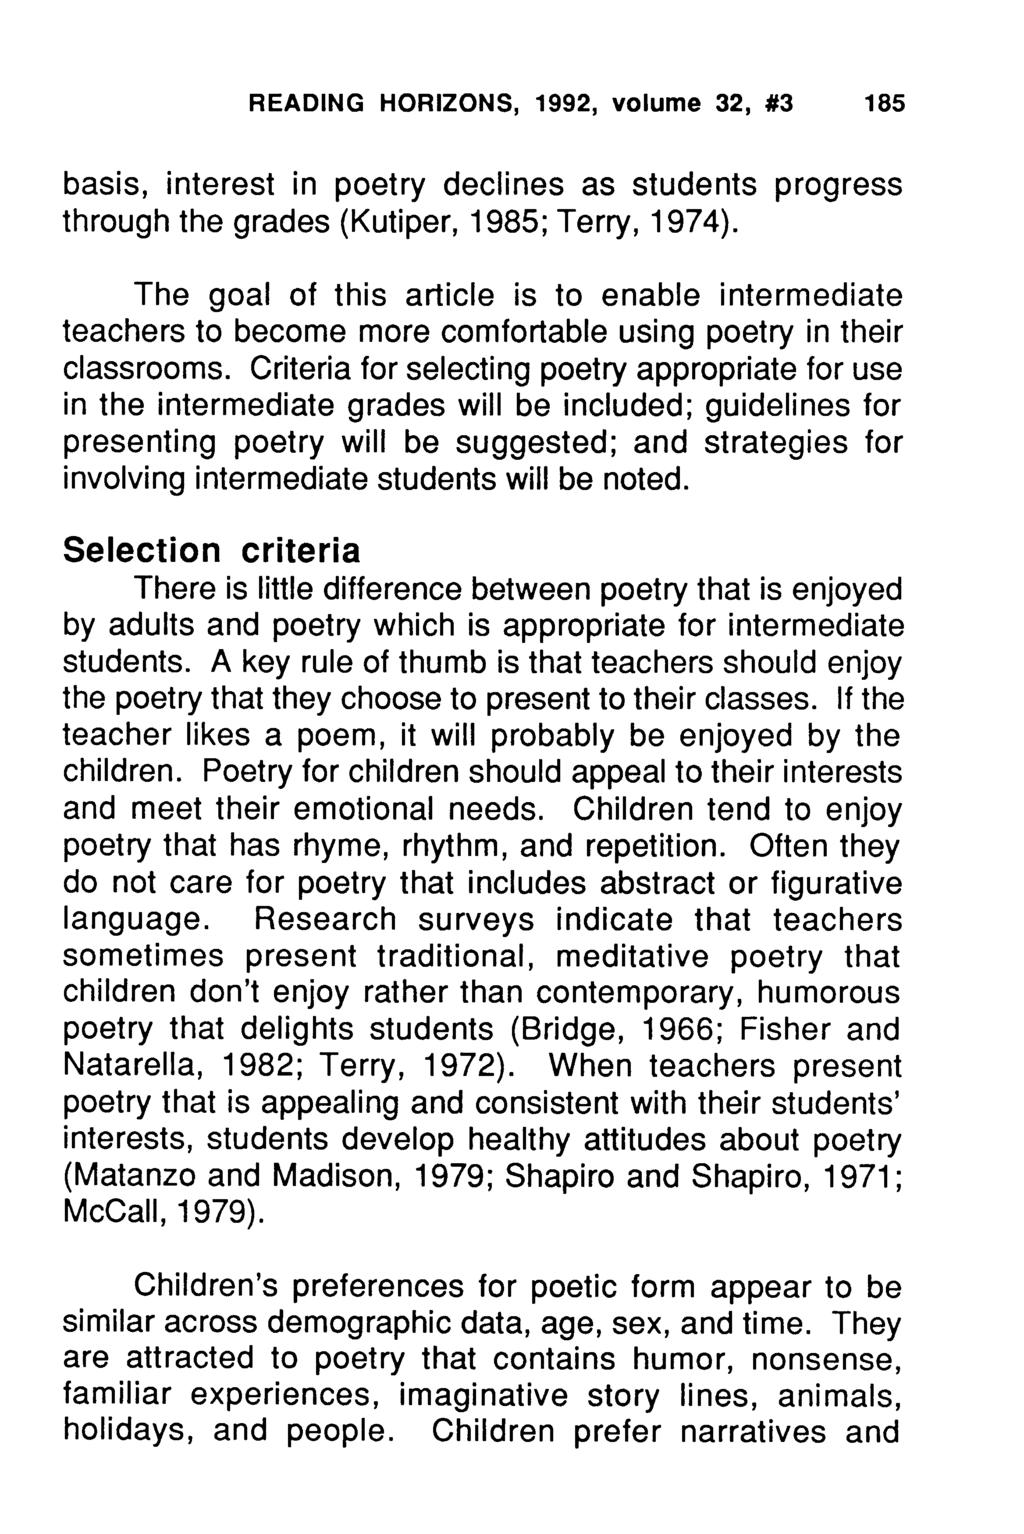 READING HORIZONS, 1992, volume 32, #3 185 basis, interest in poetry declines as students progress through the grades (Kutiper, 1985; Terry, 1974).